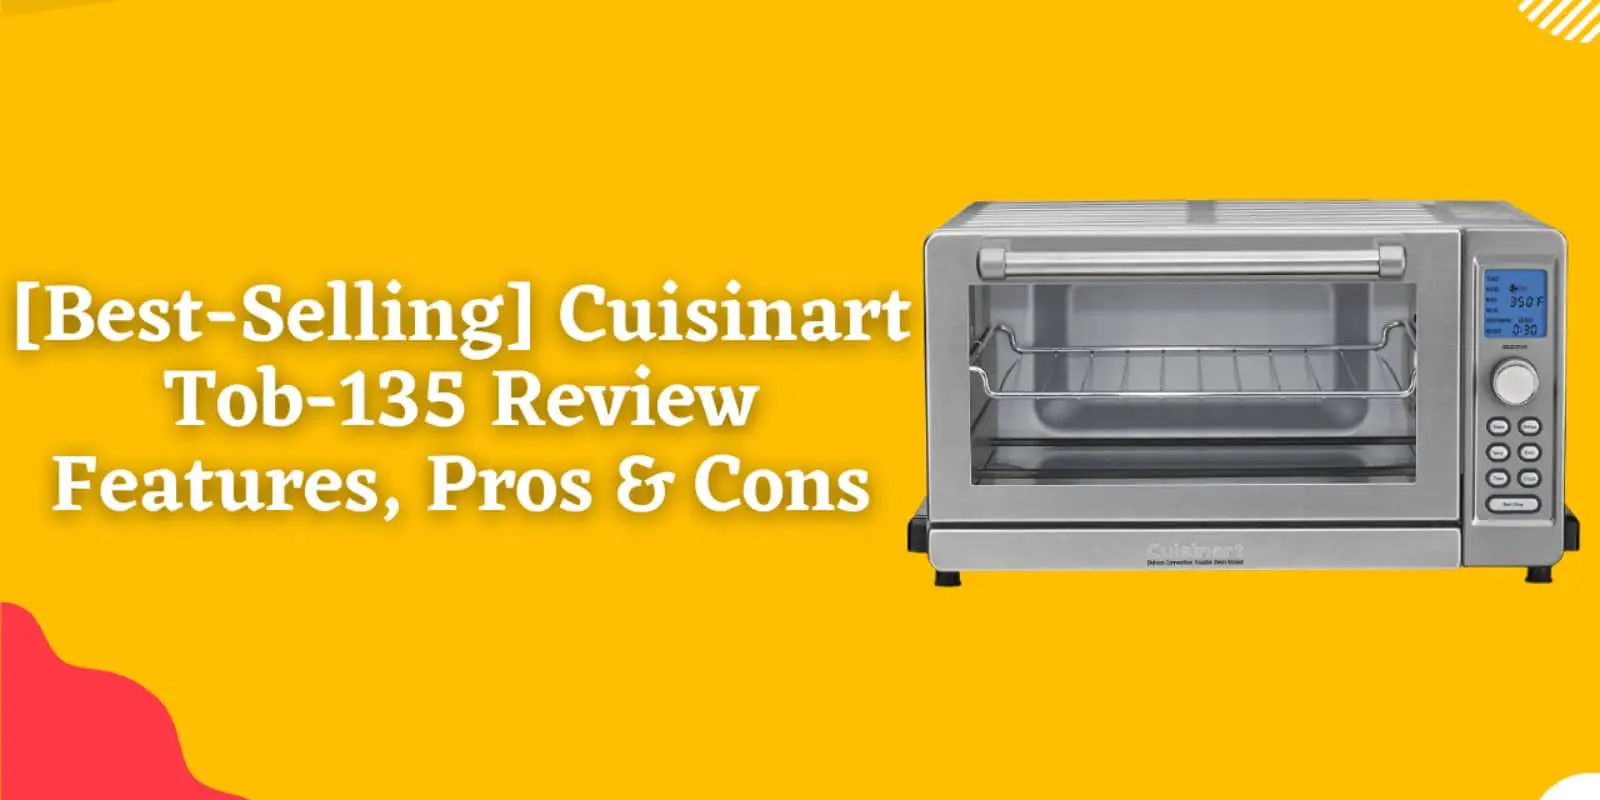 [Best-Selling] Cuisinart Tob-135 Review: Features, Pros & Cons